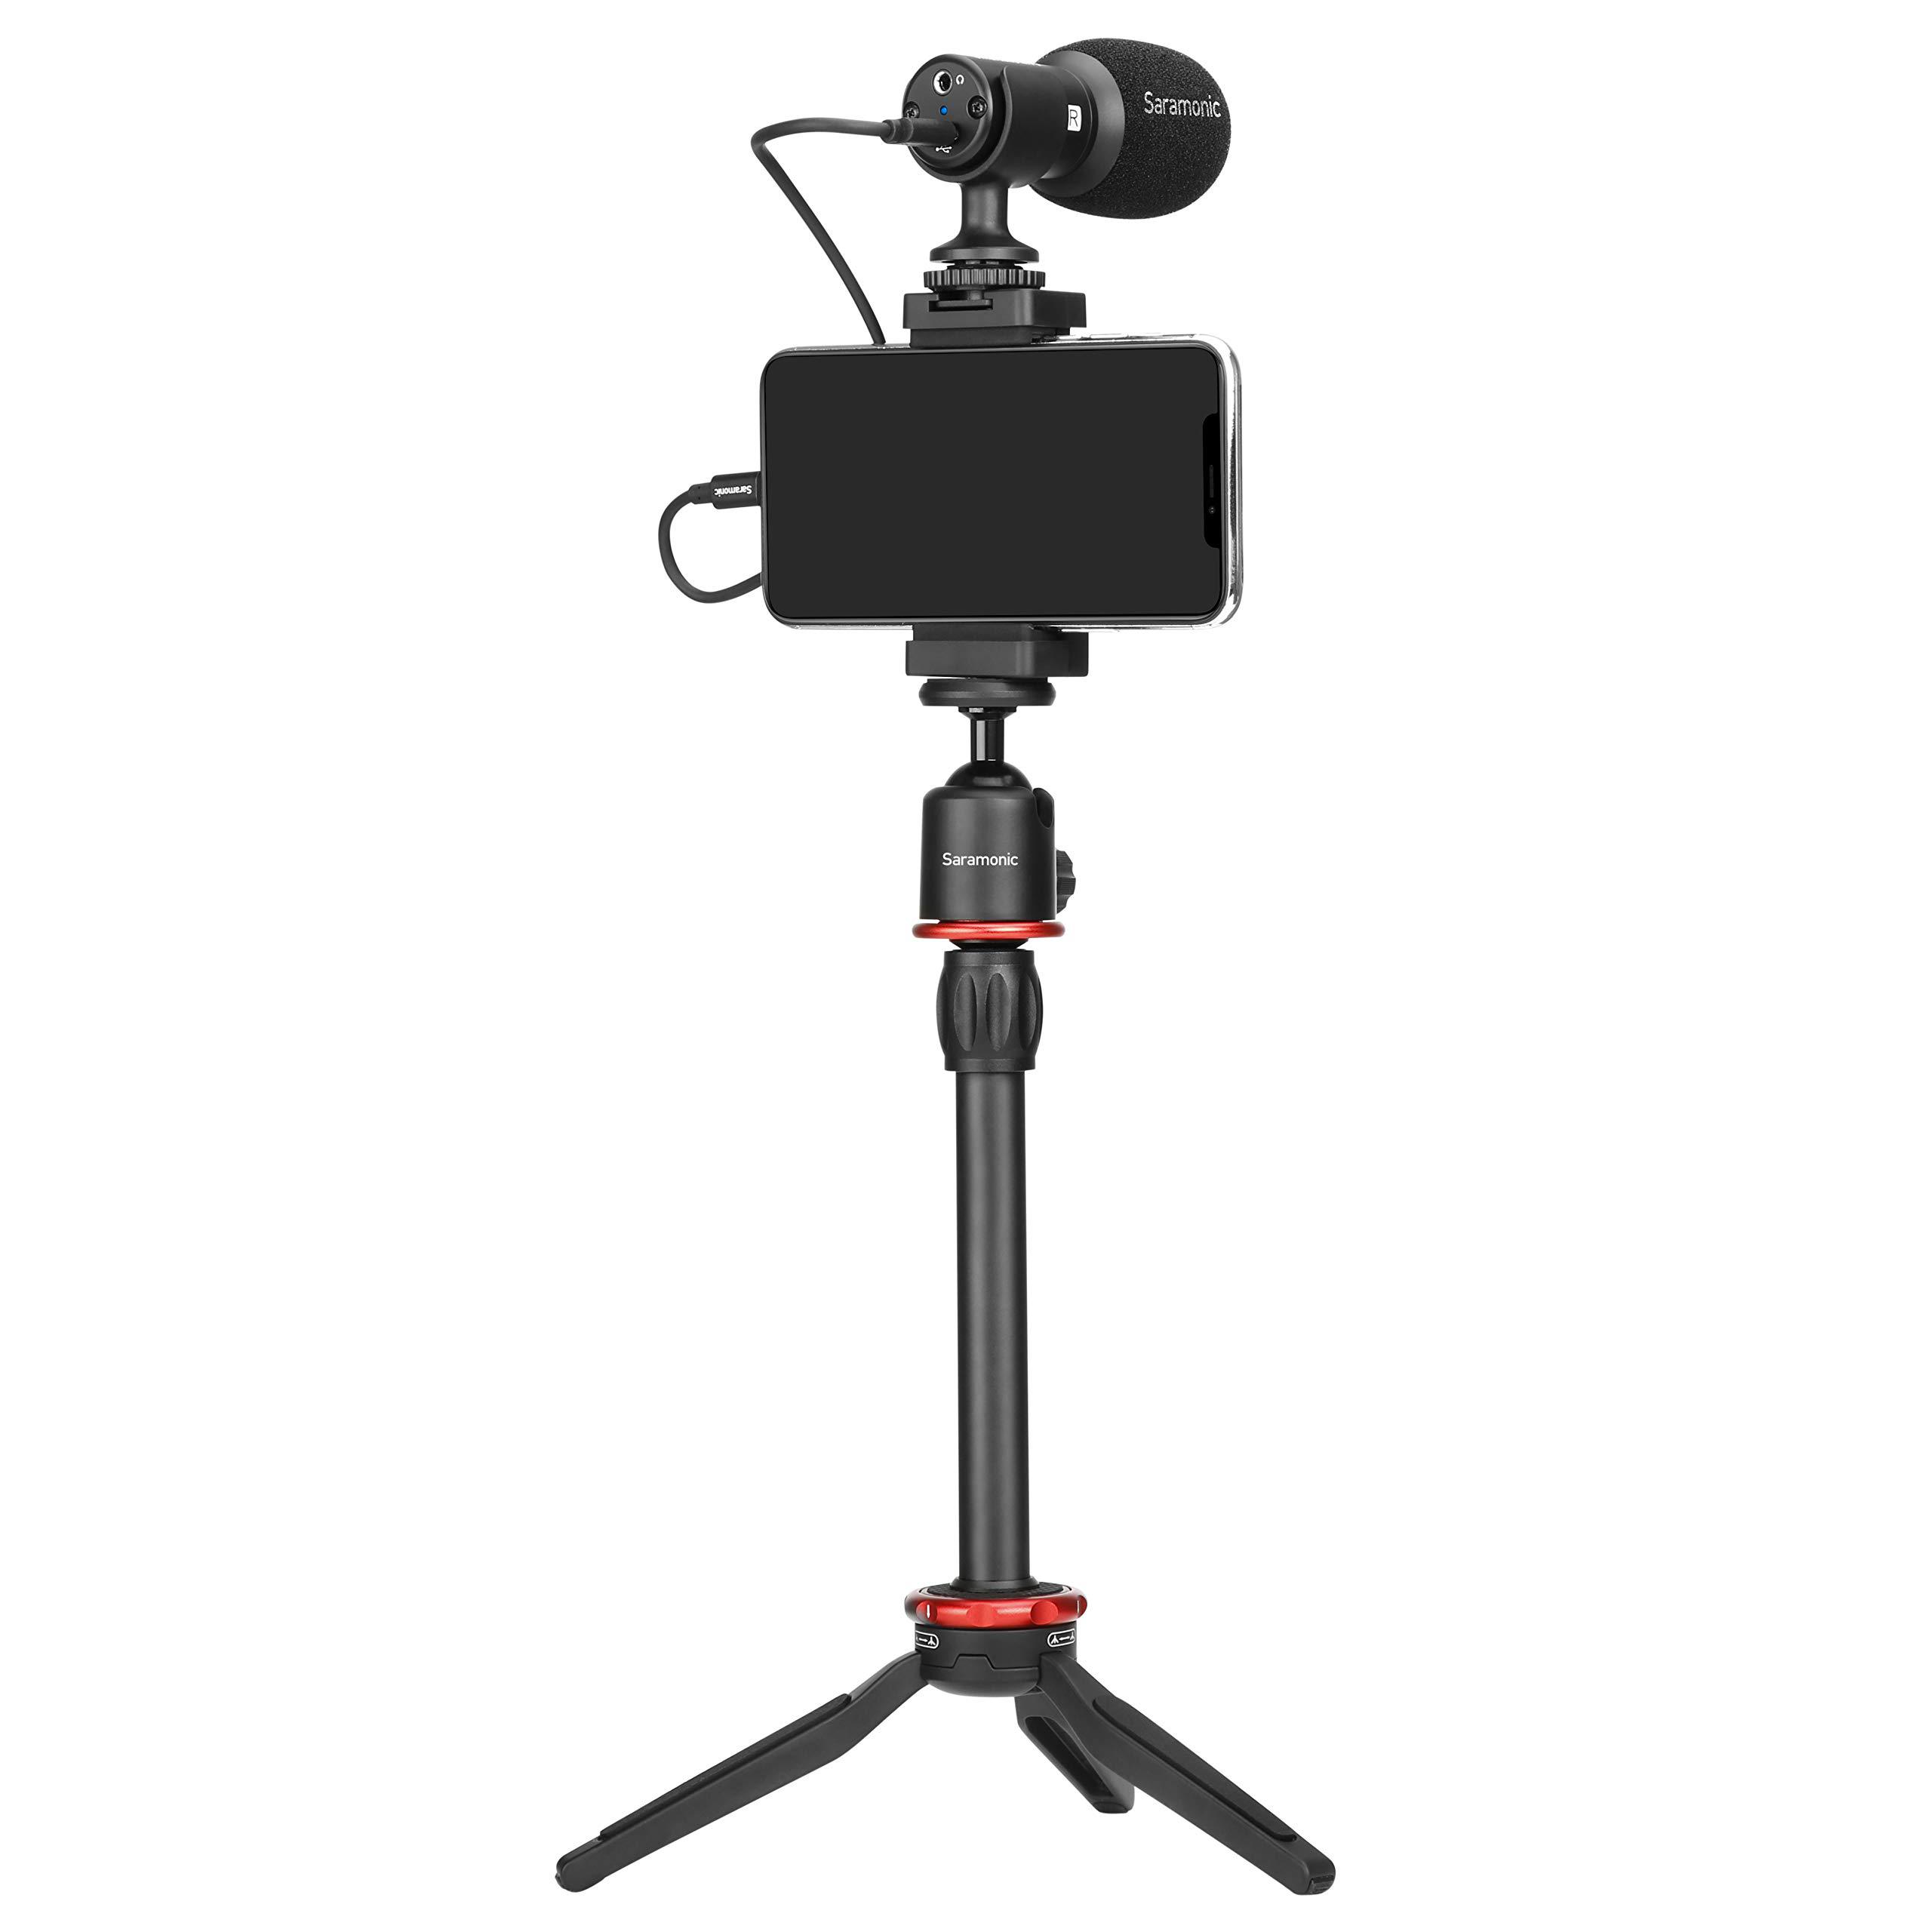 saramonic smartphone video and vlogging kit for iphone & android with stereo microphone, phone mount, tripod, headphone, ligh